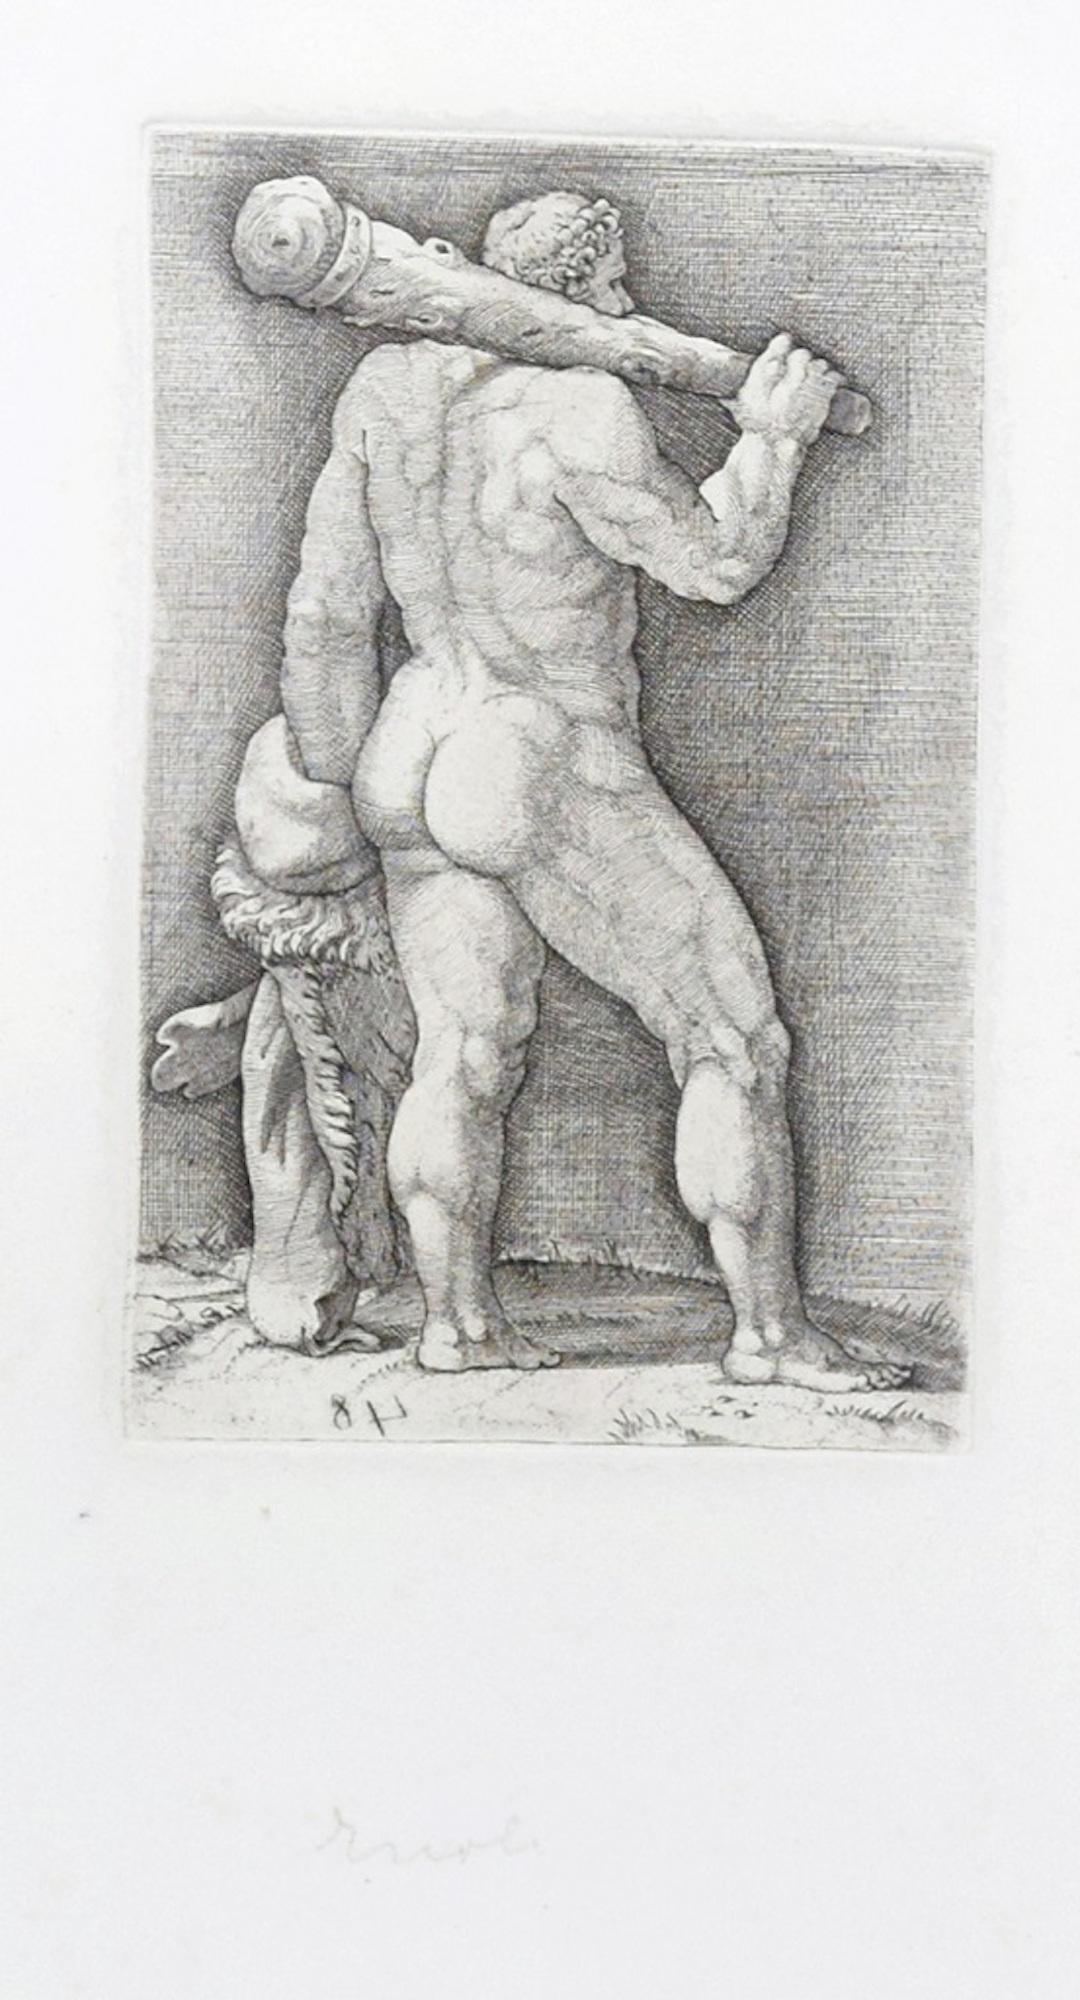 Unknown Figurative Print - Heracles with the Club - Original Etching by Anonymous Master 17th Century